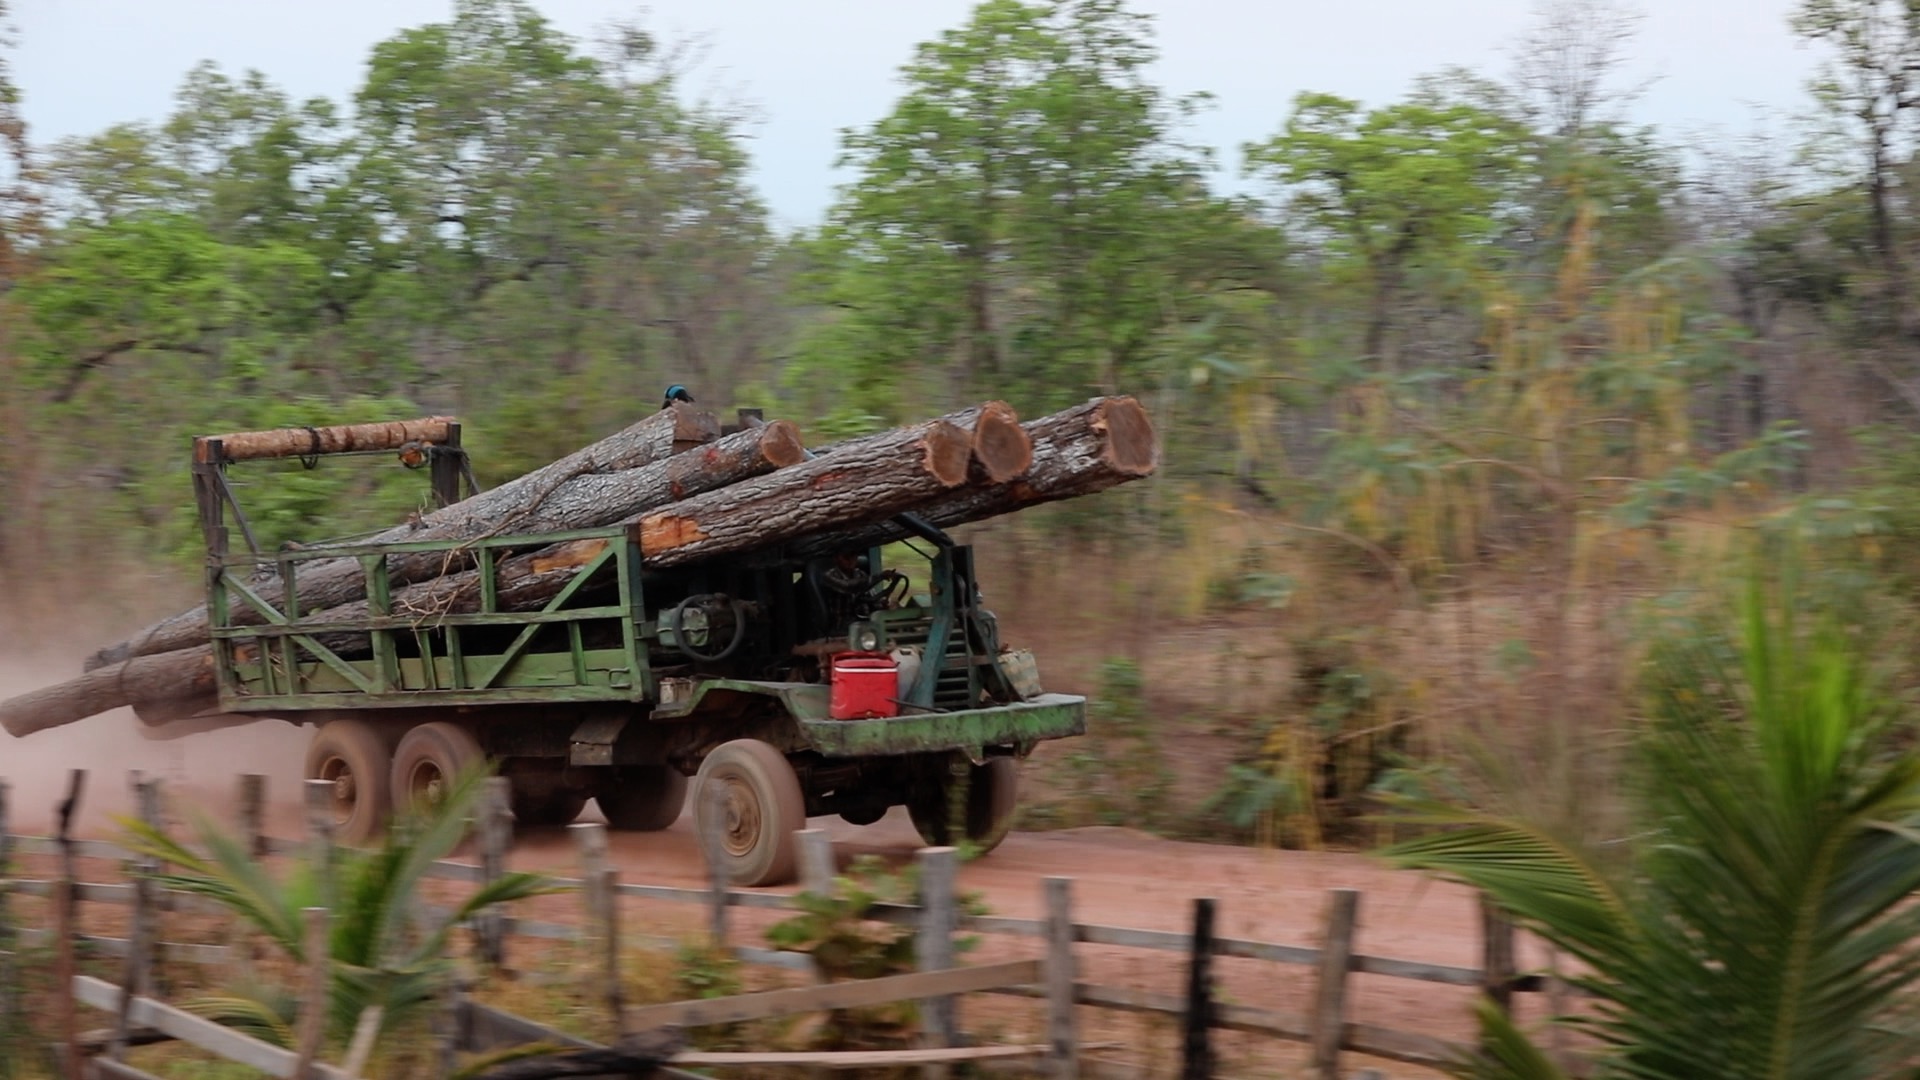 For years, environmental activists have reported incidents of illegal logging, but authorities have been unwilling or unable to protect Prey Lang Wildlife Sanctuary. This logging truck was seen transporting timber near Think Biotech's concession in 2020. Image by Ma Chettra.